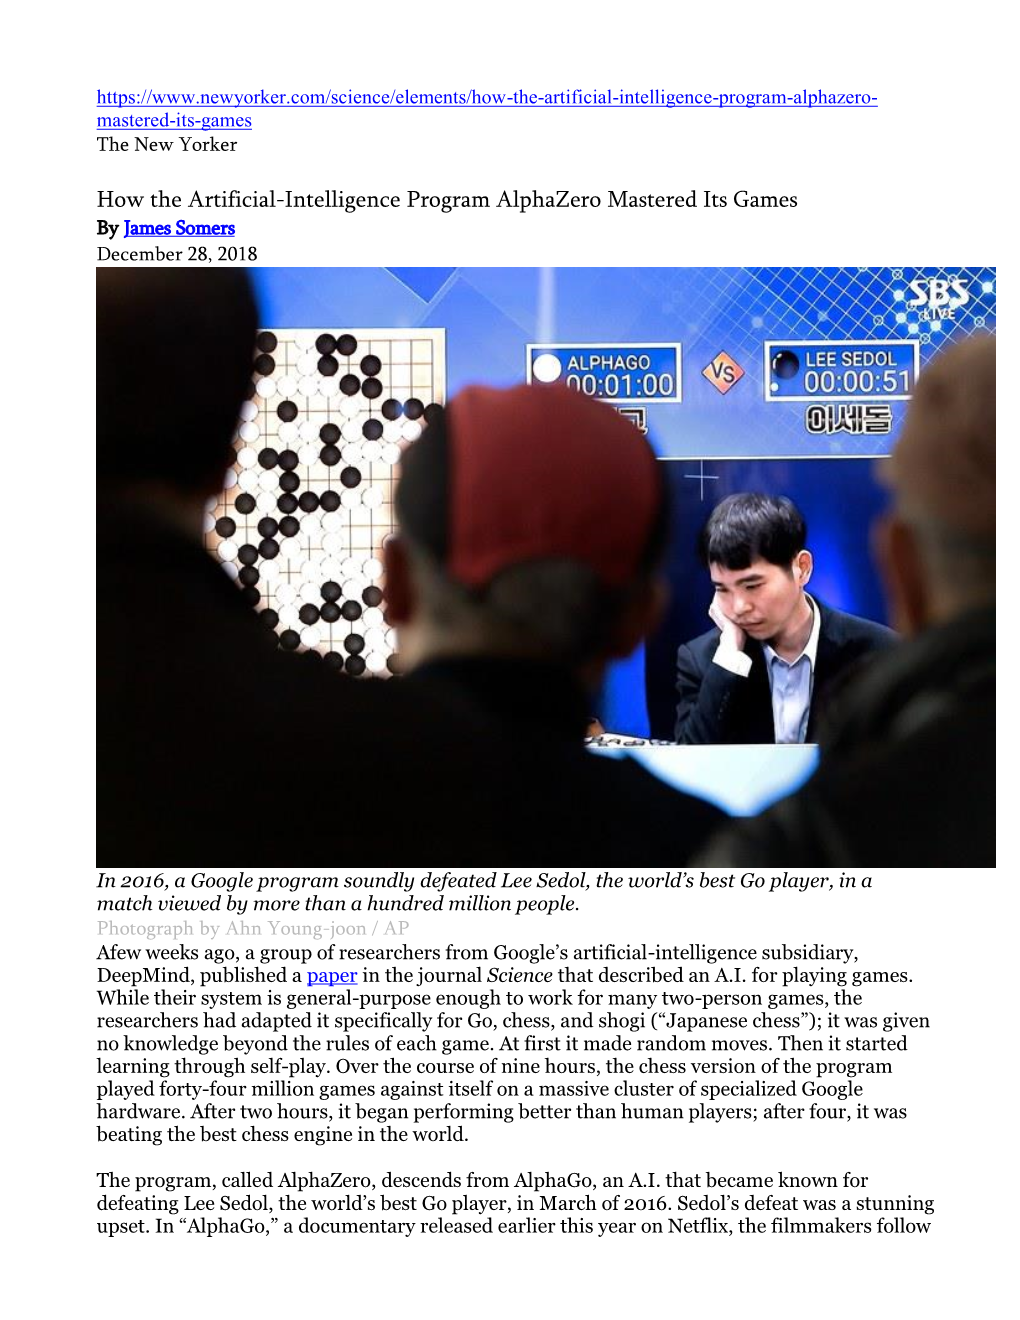 How the Artificial-Intelligence Program Alphazero Mastered Its Games by James Somers December 28, 2018